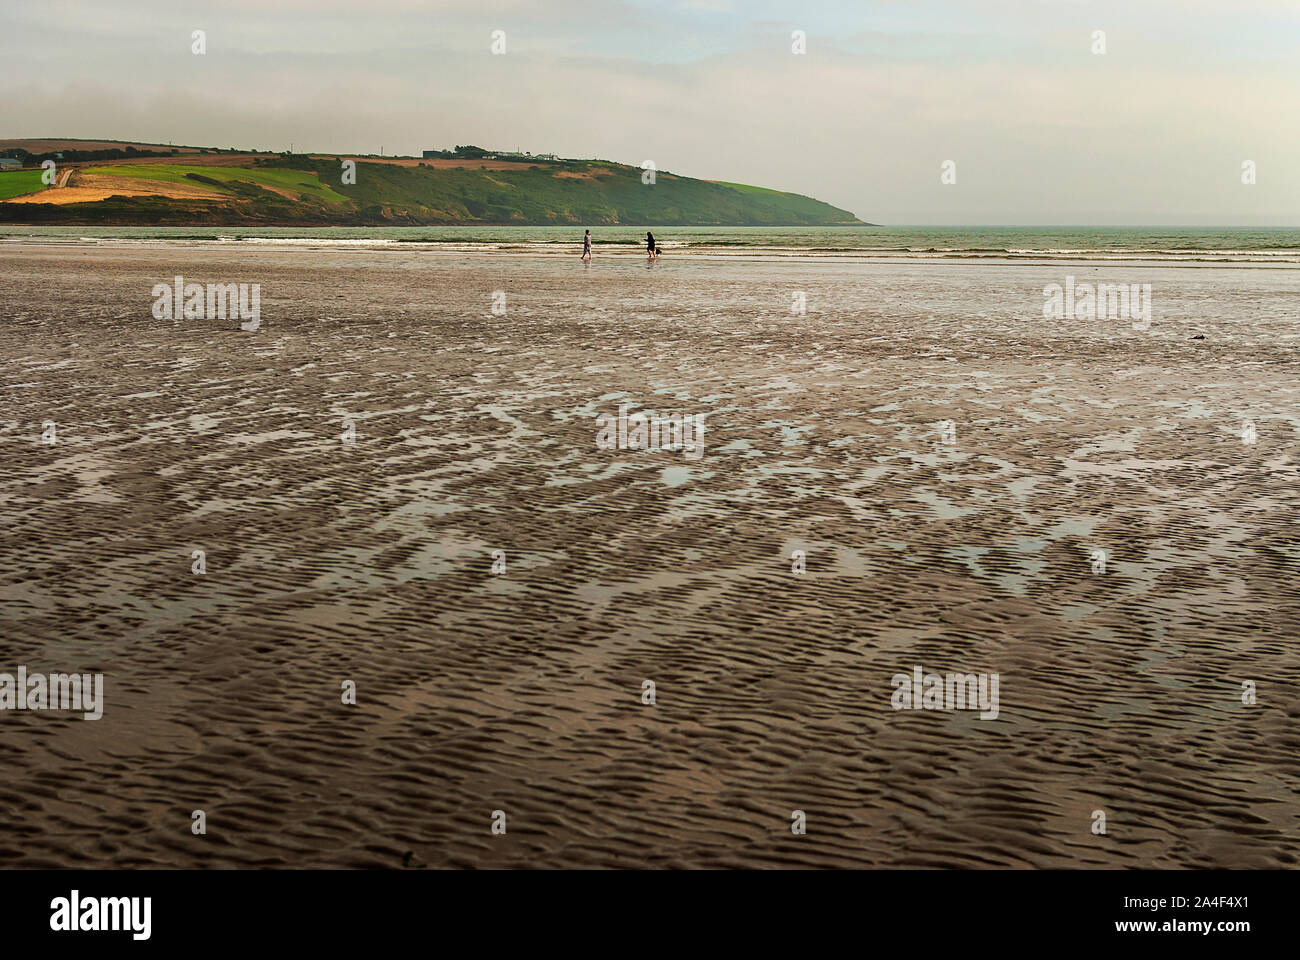 Couple walking on sandy beach leaving footprints in the sand, with a dog. Cloudy day. Stock Photo